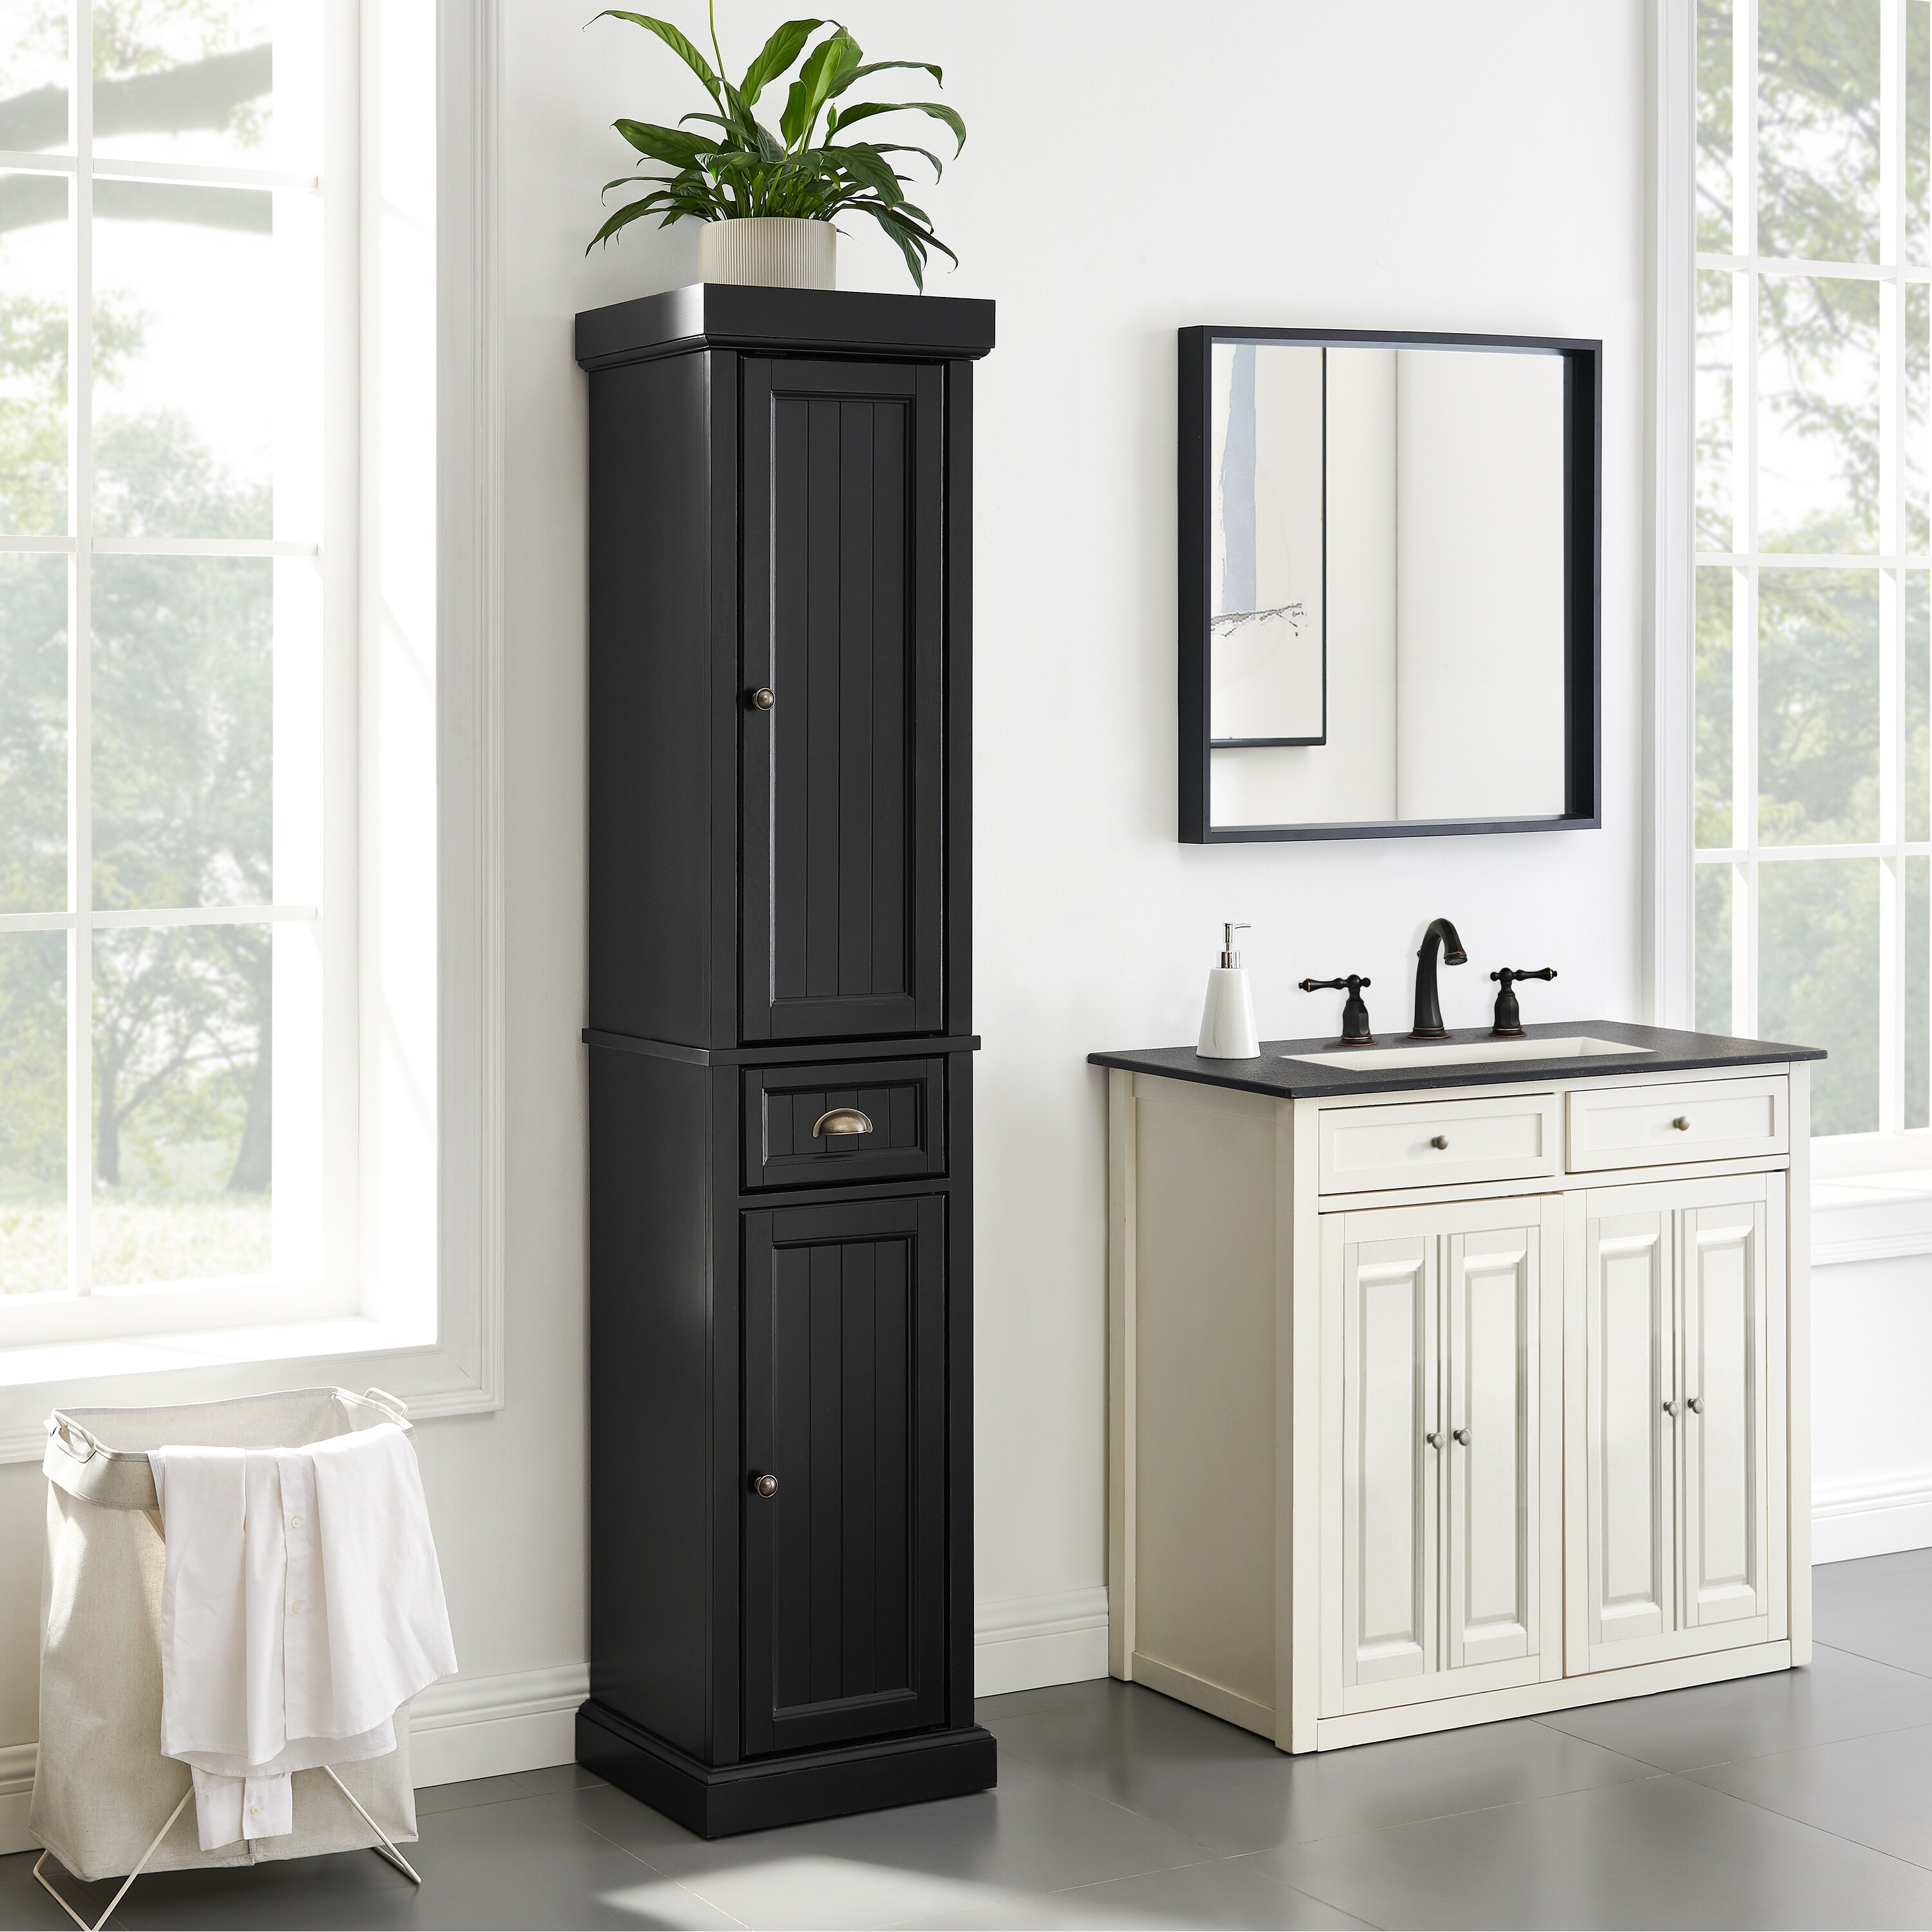 https://ak1.ostkcdn.com/images/products/is/images/direct/12e52f13a1252286435aa9326ec0b11b2ee47e18/Seaside-Tall-Linen-Cabinet.jpg